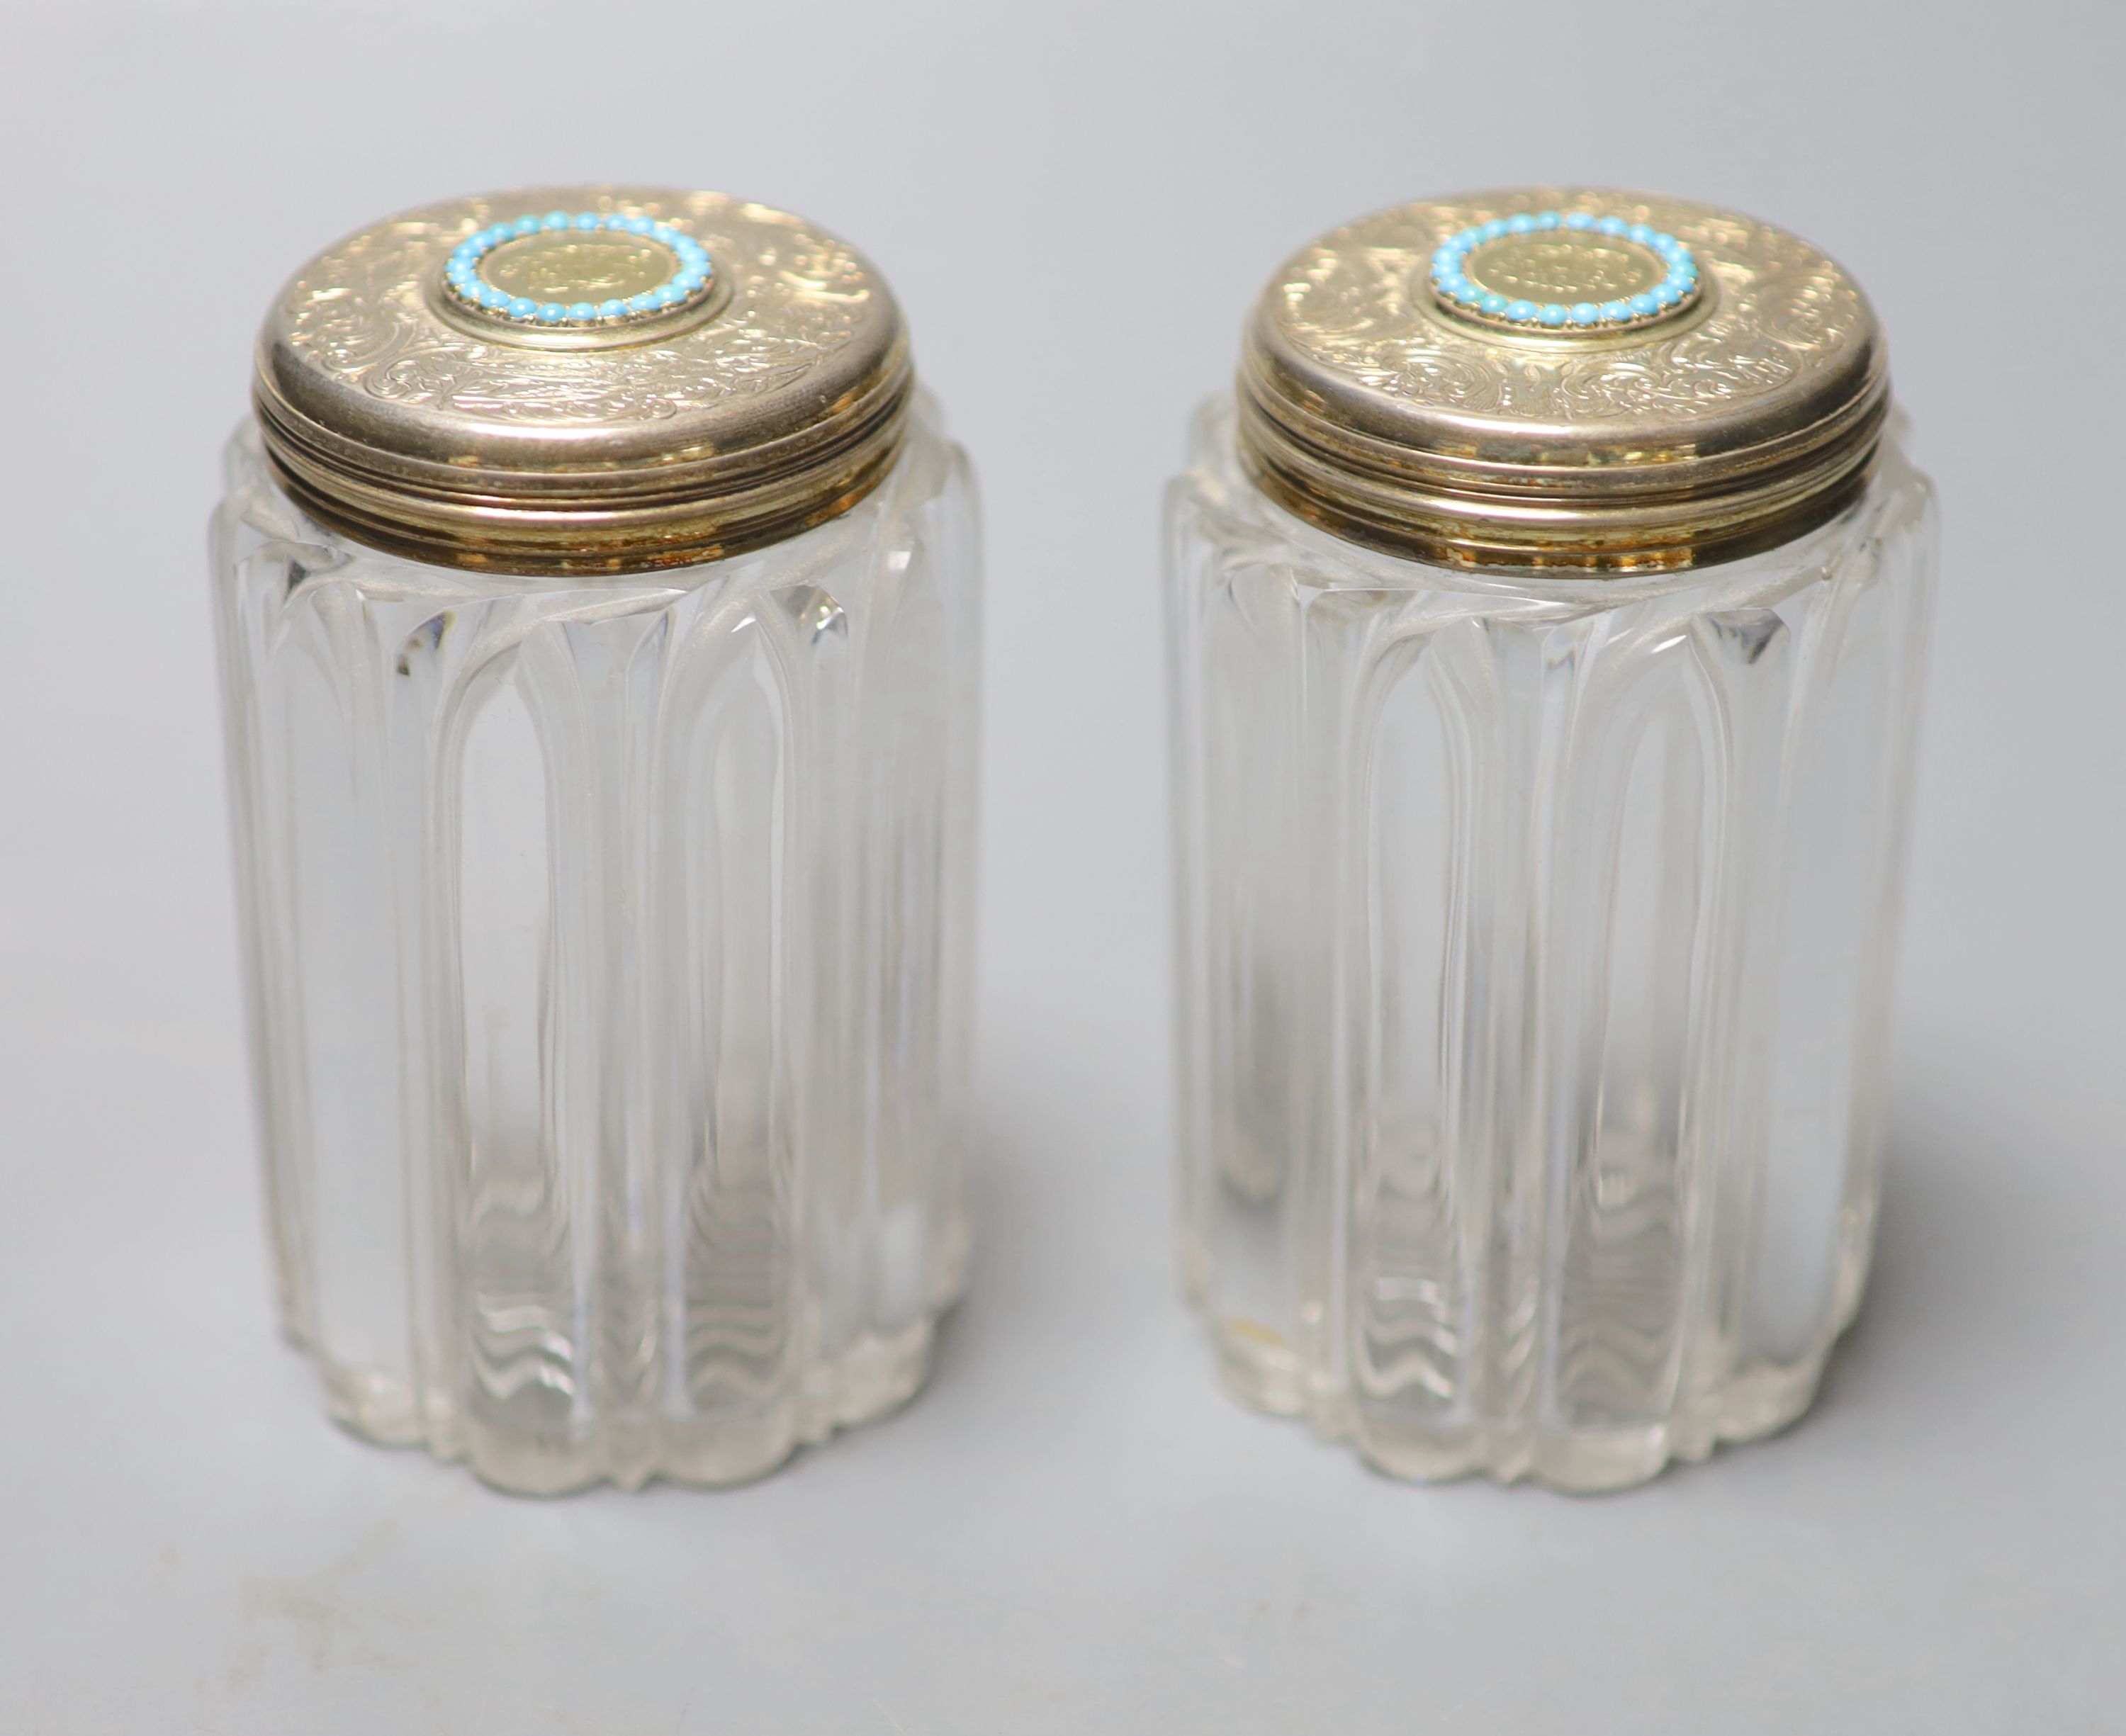 A pair of Victorian silver gilt and turquoise lidded glass cylindrical toilet jars, John Harris, London, 1854, 9.8cm.